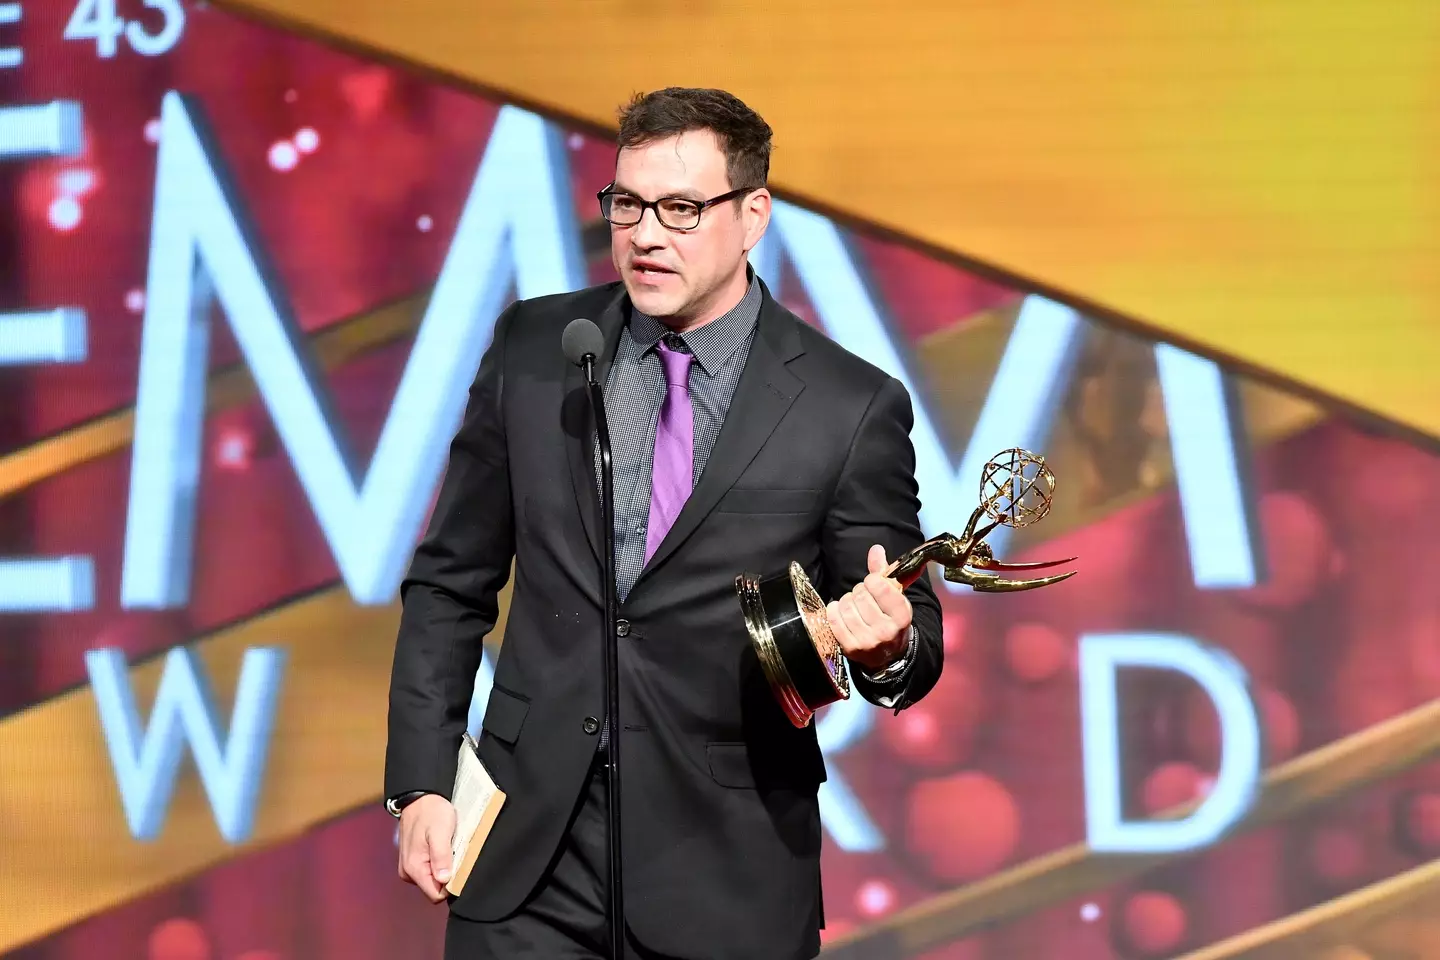 Christopher won a Daytime Emmy Award for his role in General Hospital.